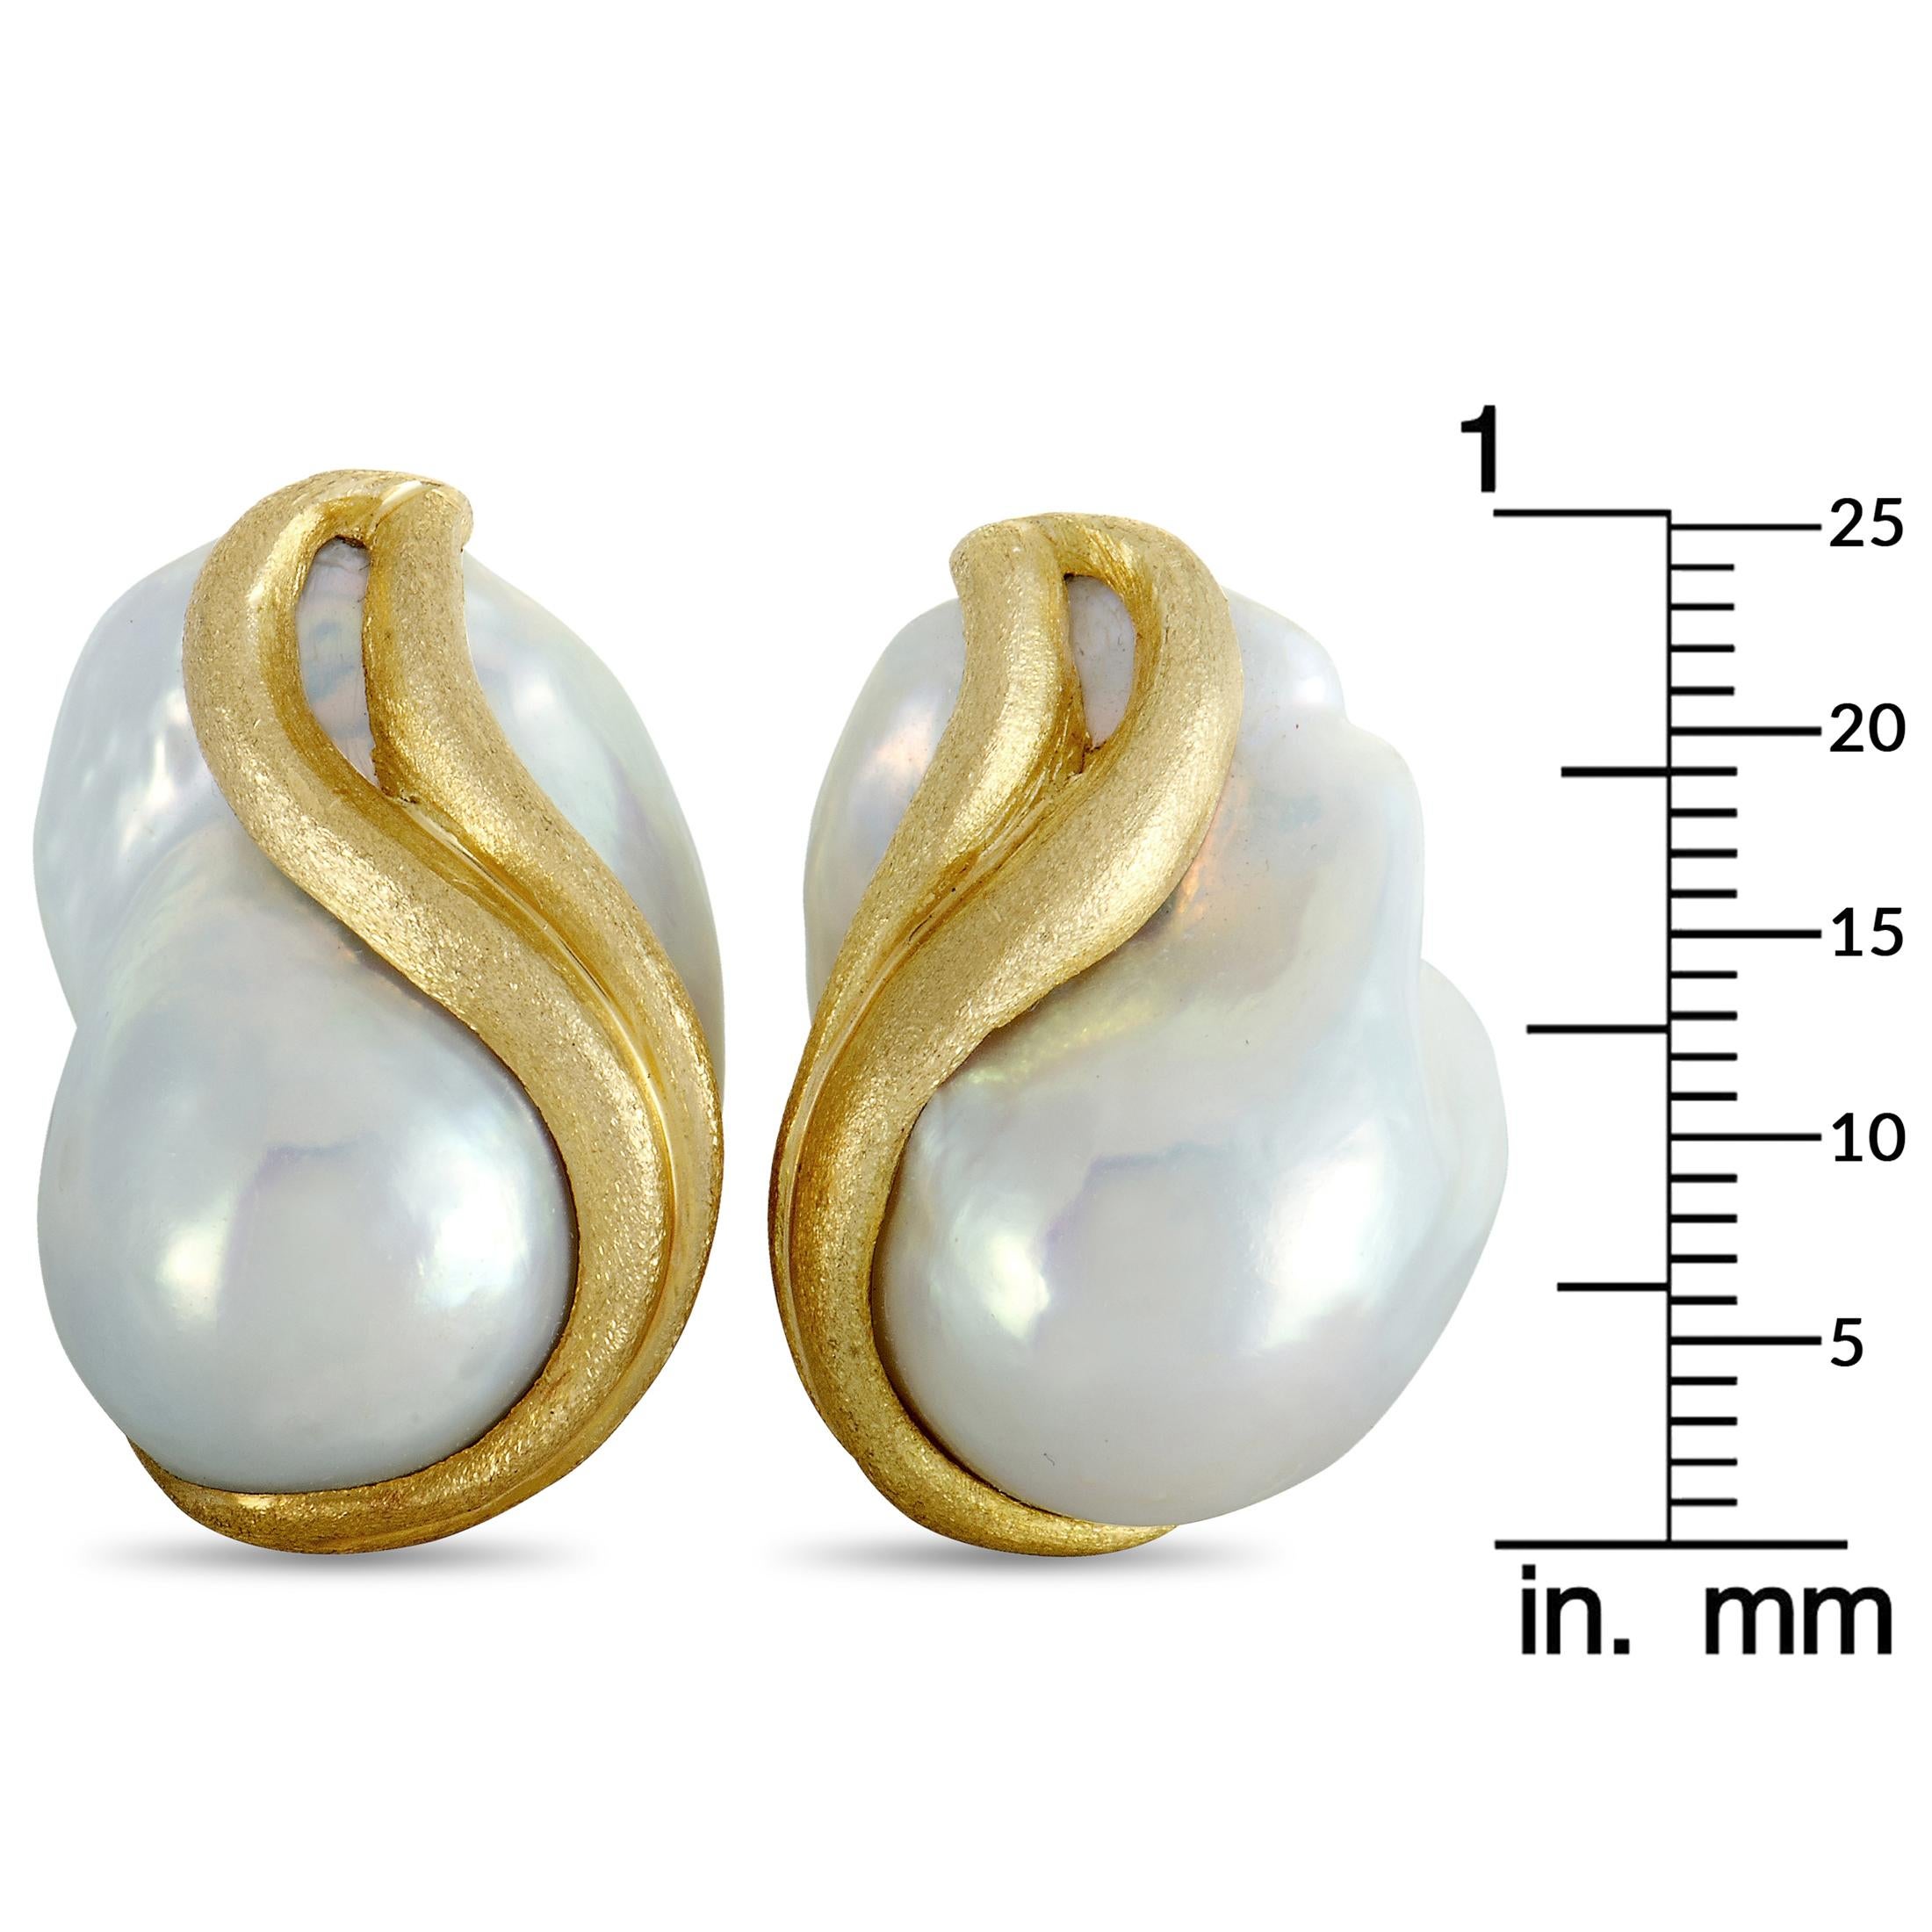 This pair of earrings by Yvel is made of 18K yellow gold and set with pearls. Each of the two earrings weighs 14.7 grams and they measure 1” in length and 0.70” in width.
 
 The earrings are offered in brand new condition and include the